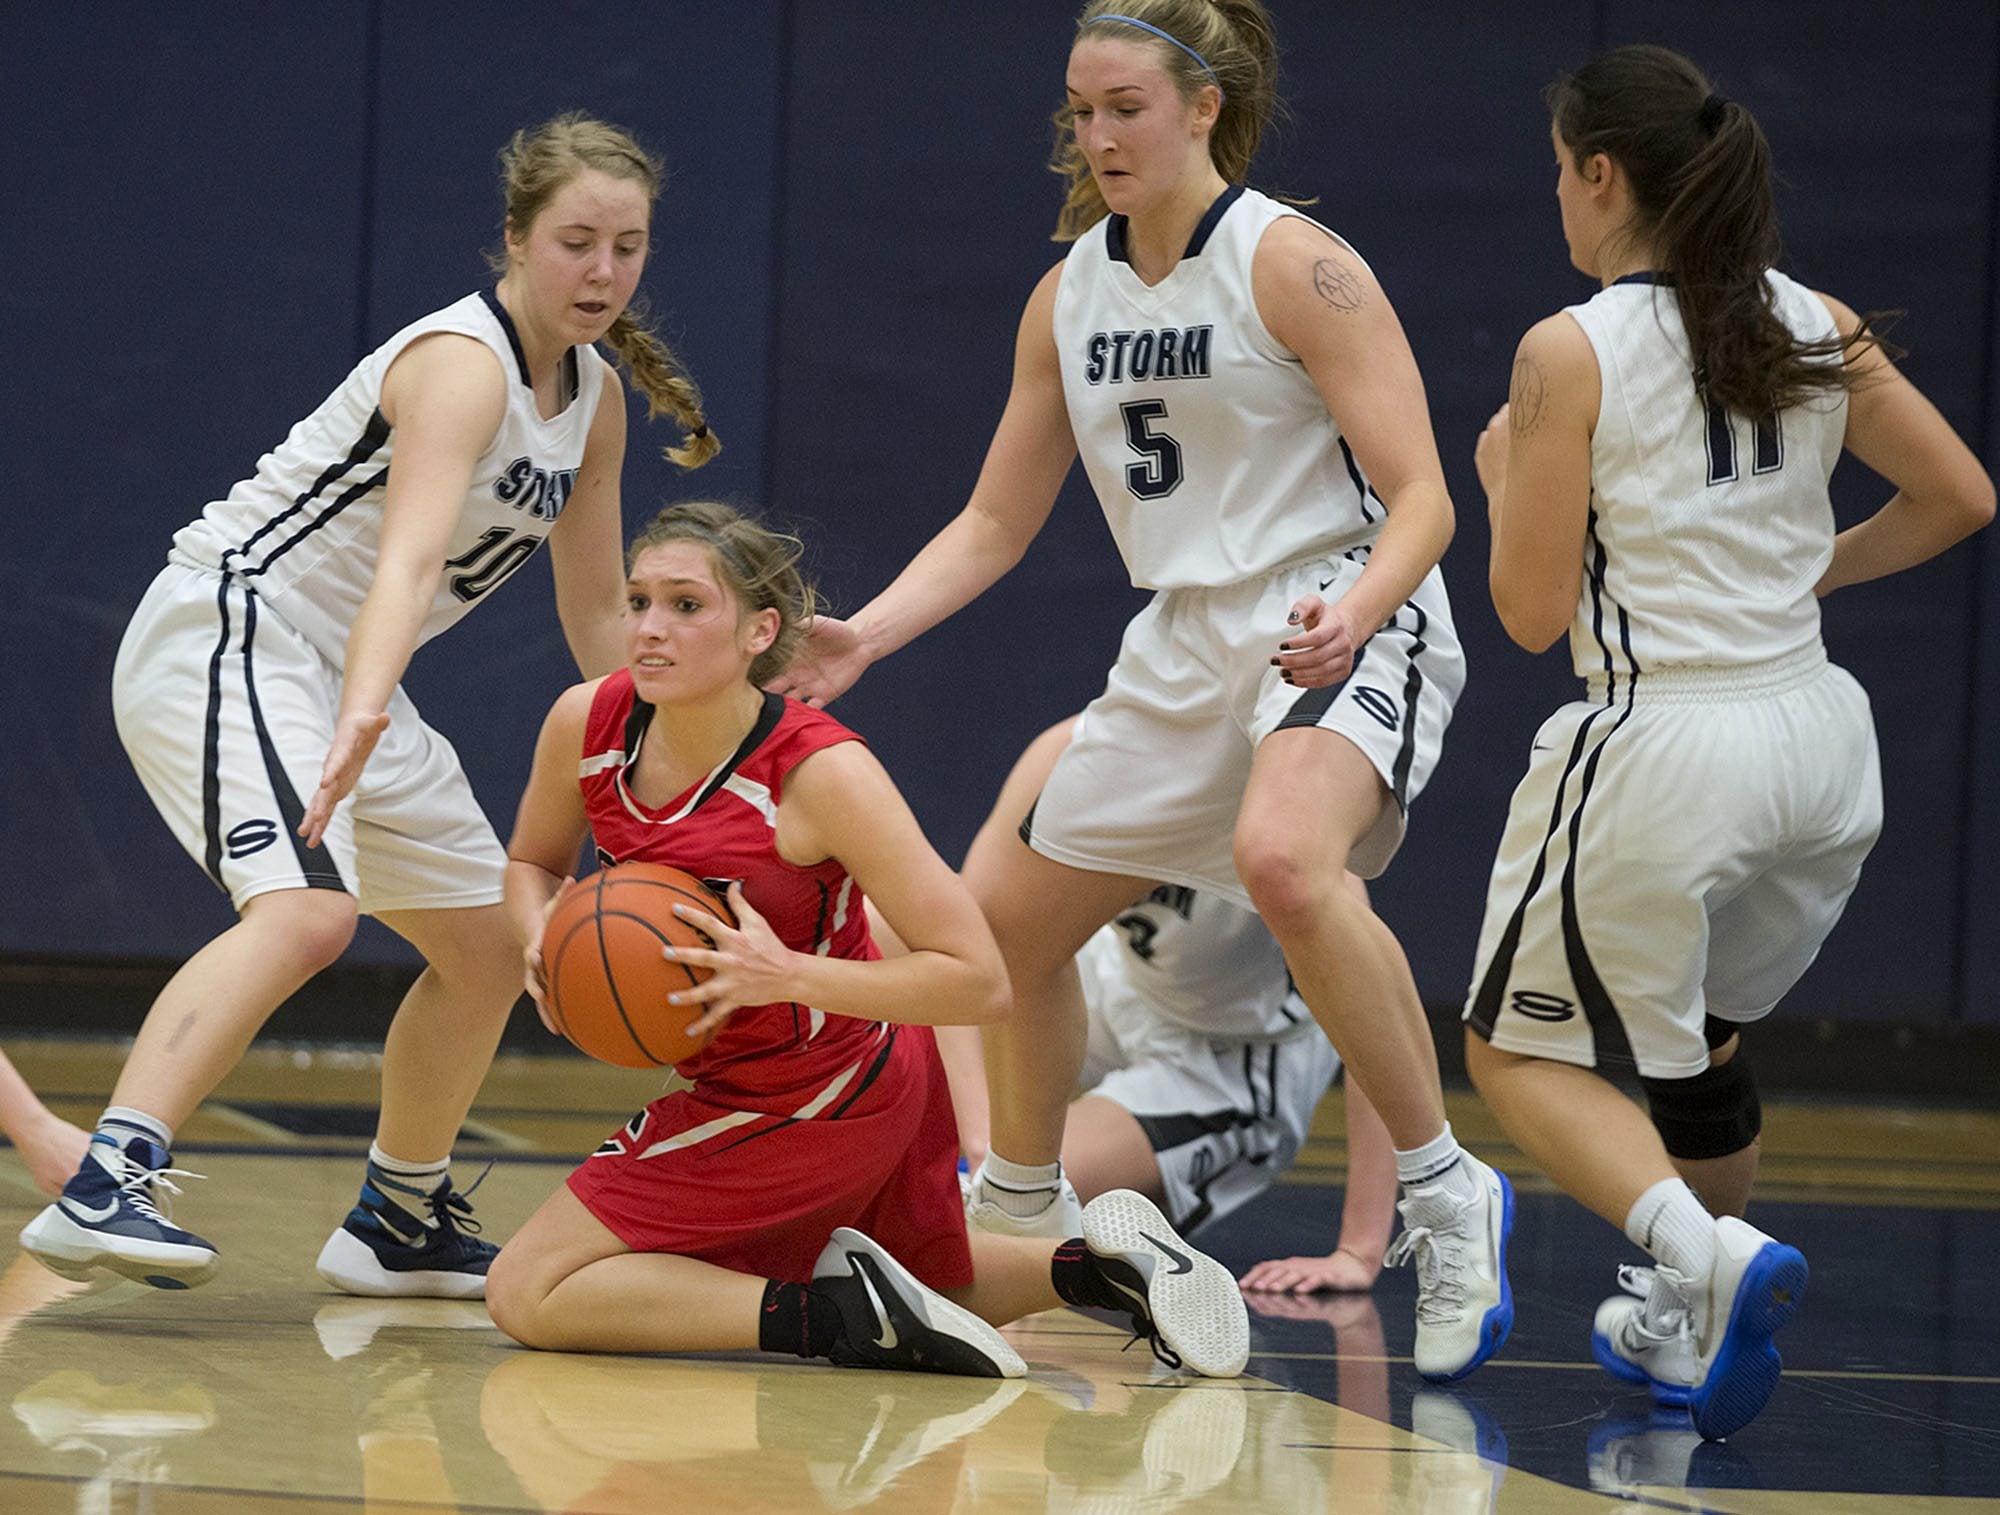 Camas' Meghan Finley, kneeling, recovers a loose ball in the fourth quarter as Skyview's Hanna Van Nortwick (10), Sydney Friauf (5) and Remington Riley (11) help out on the play Tuesday night, Feb. 2, 2016 at Skyview High School gym.